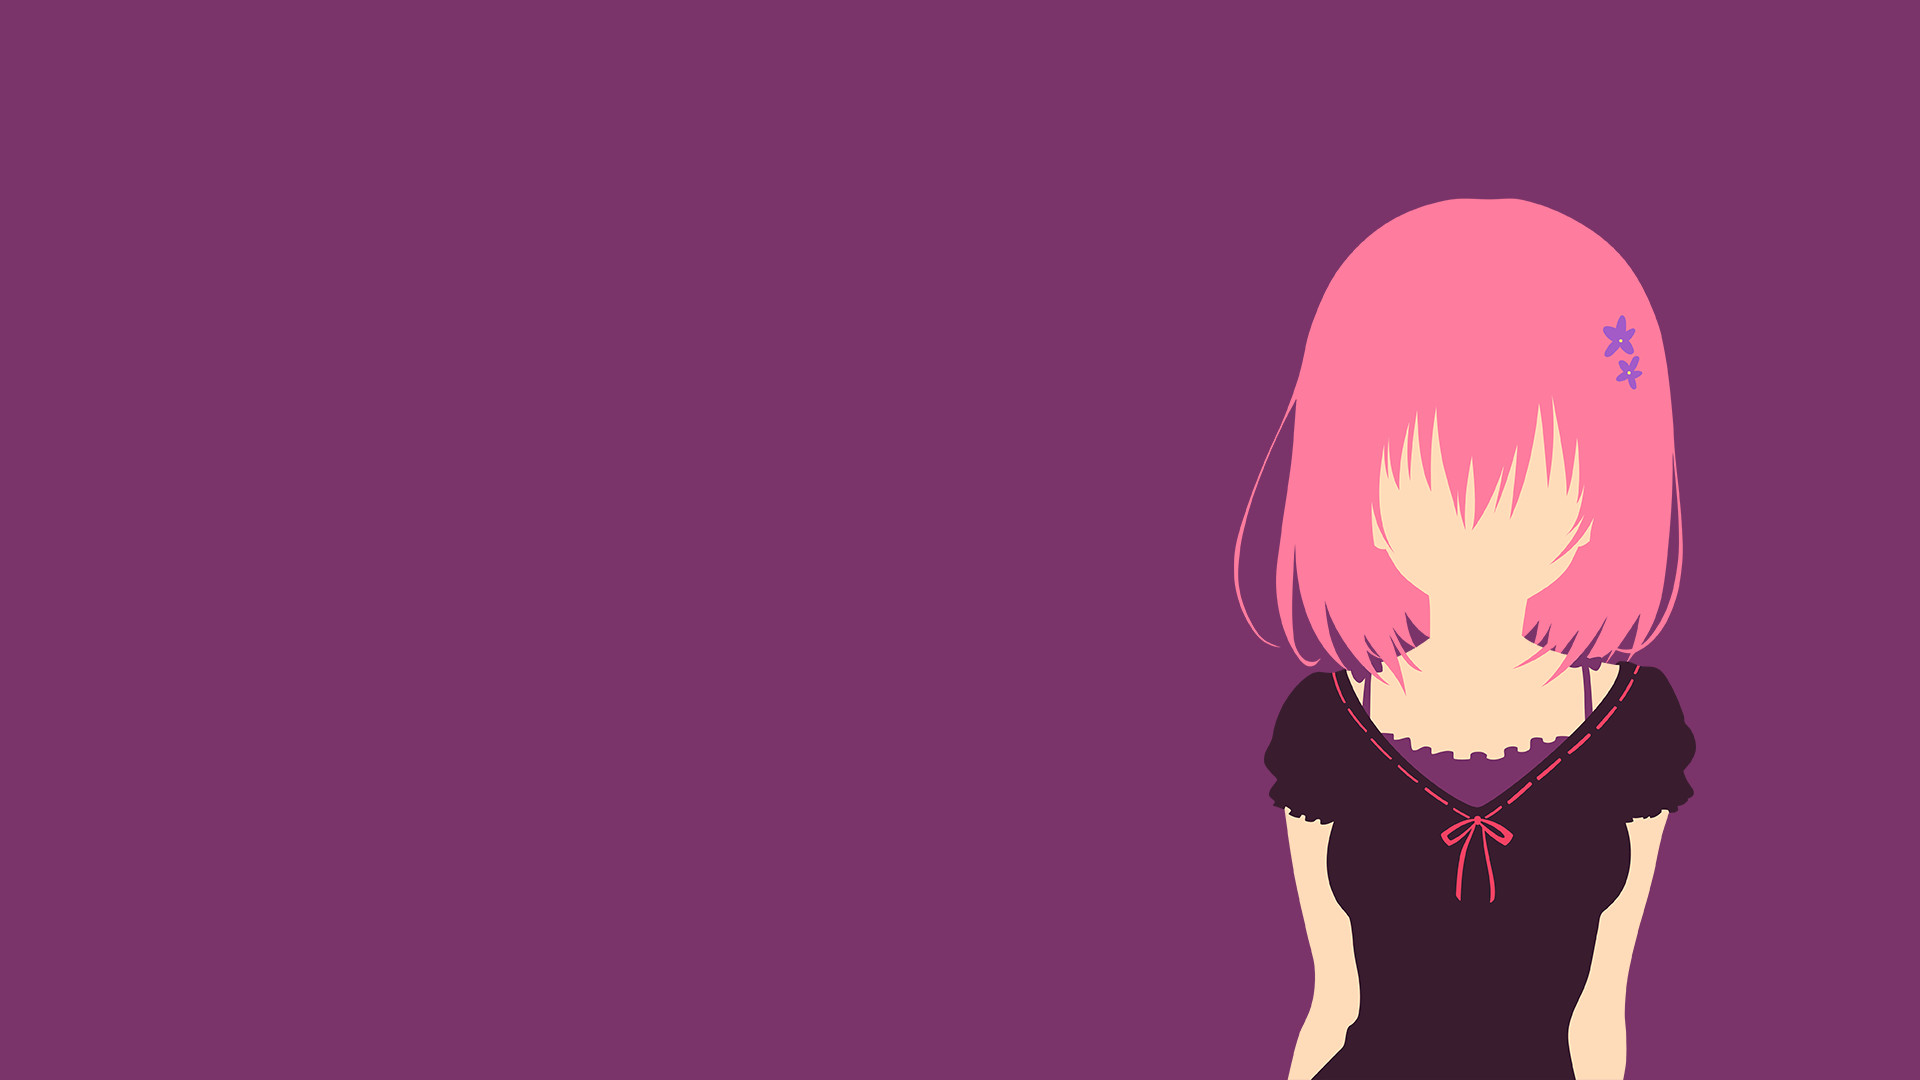 1920x1080 ... Momo Minimalistic Wallpaper - To LOVE-Ru by Co1onel